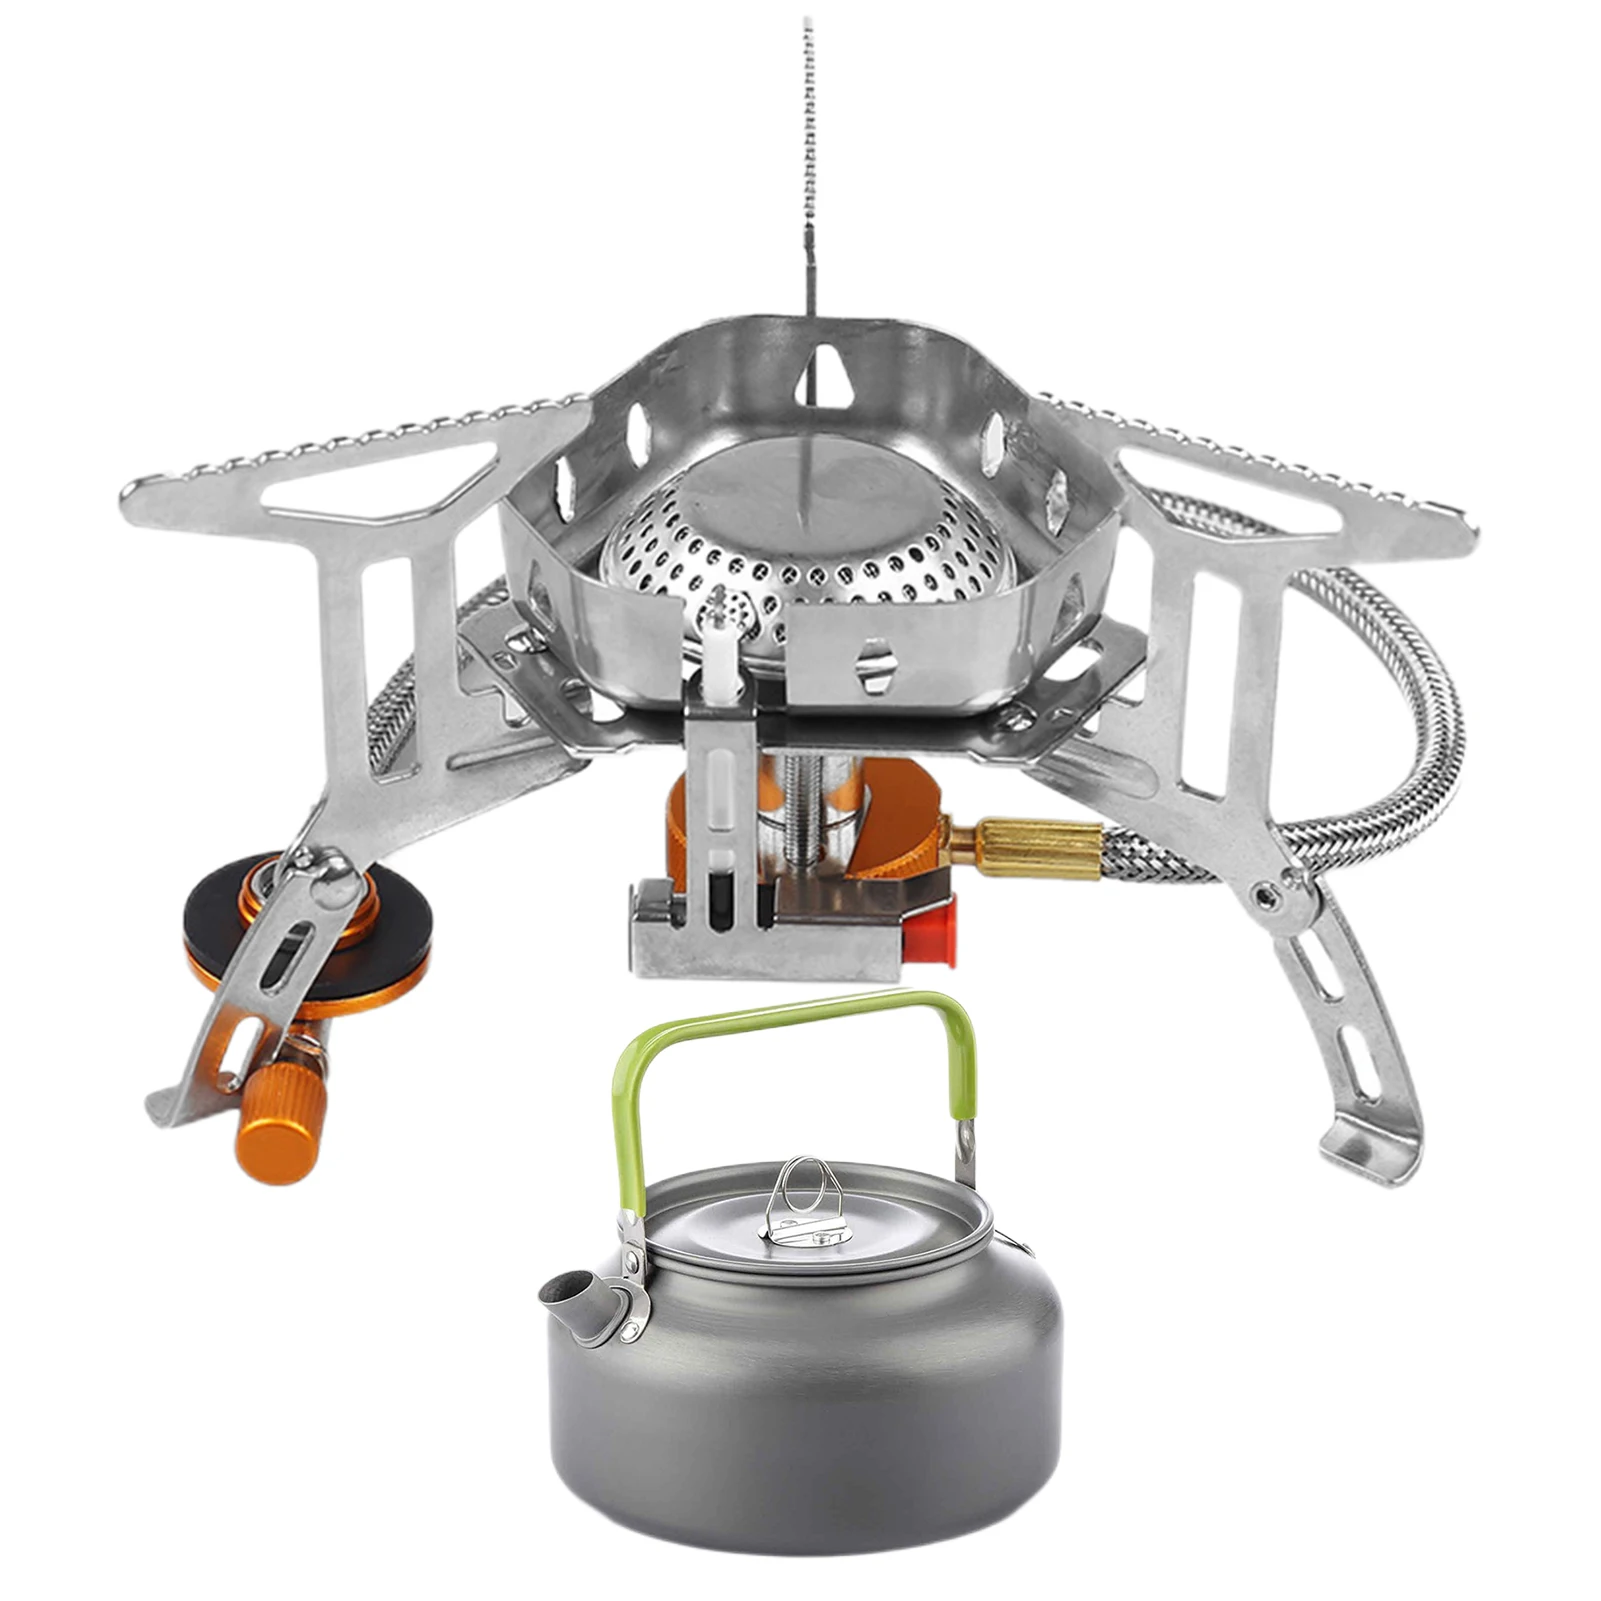 

Camping Stove Small 3700W Windproof Camp Stove Folding Camp Stove Burner Lightweight Stove For Outdoor Hiking Cooking